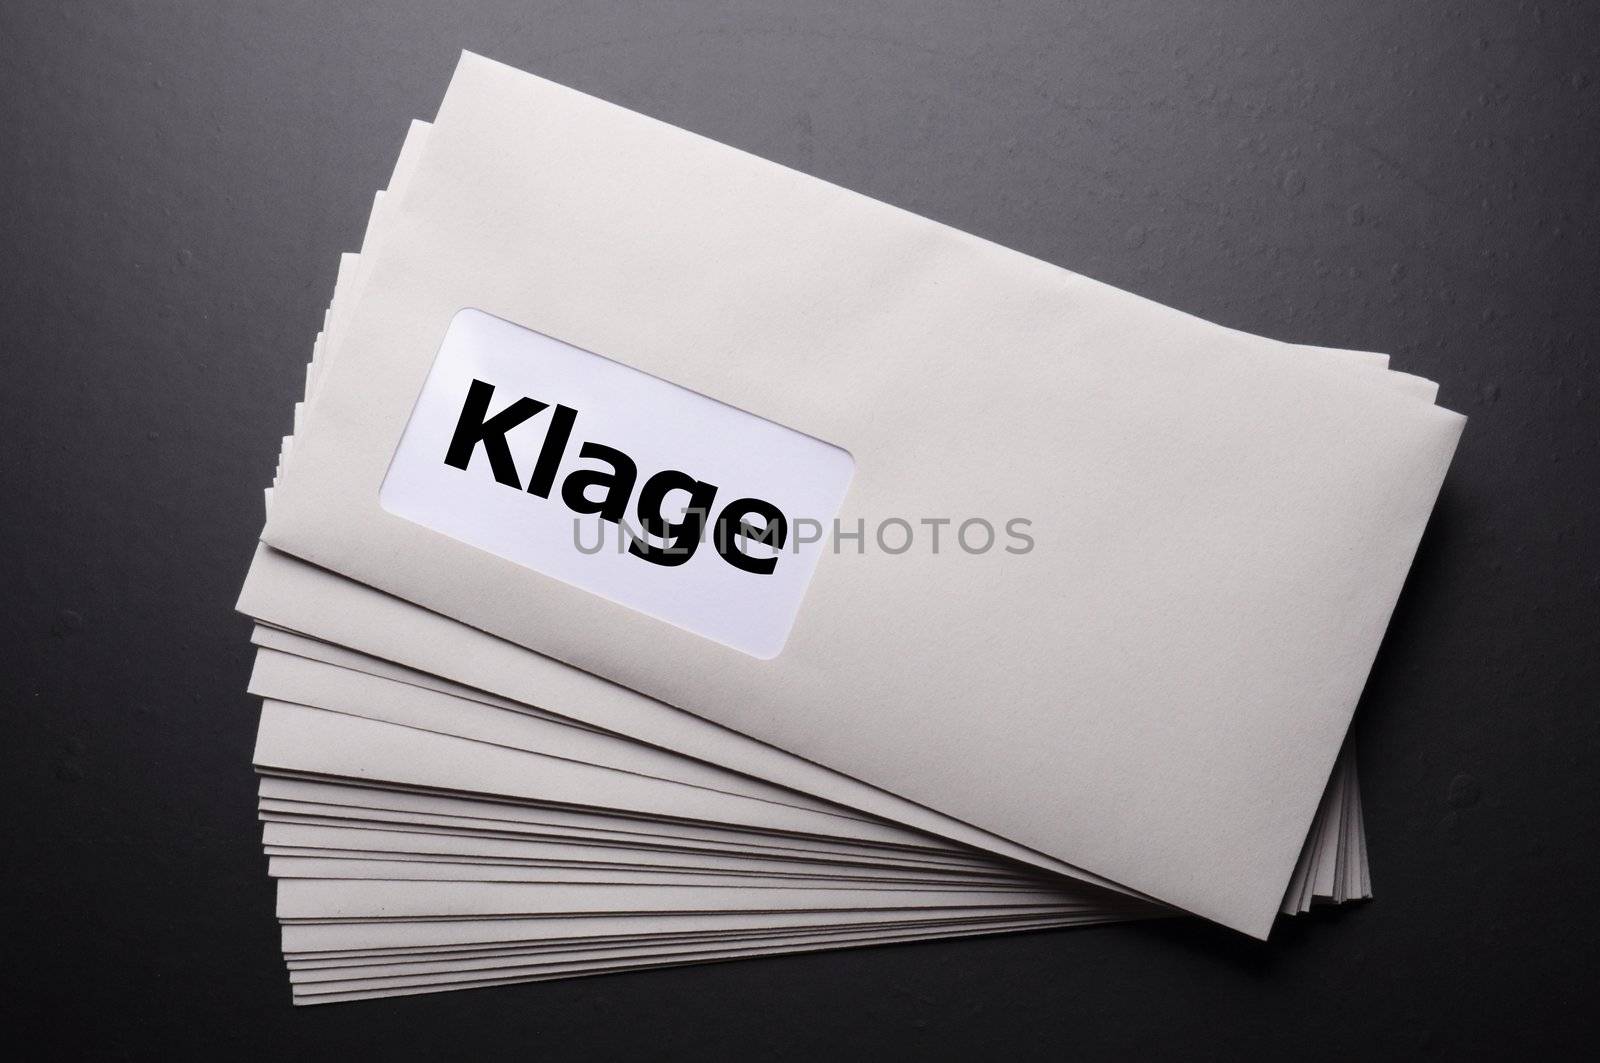 legal law or lawsiut business concept with envelope and word